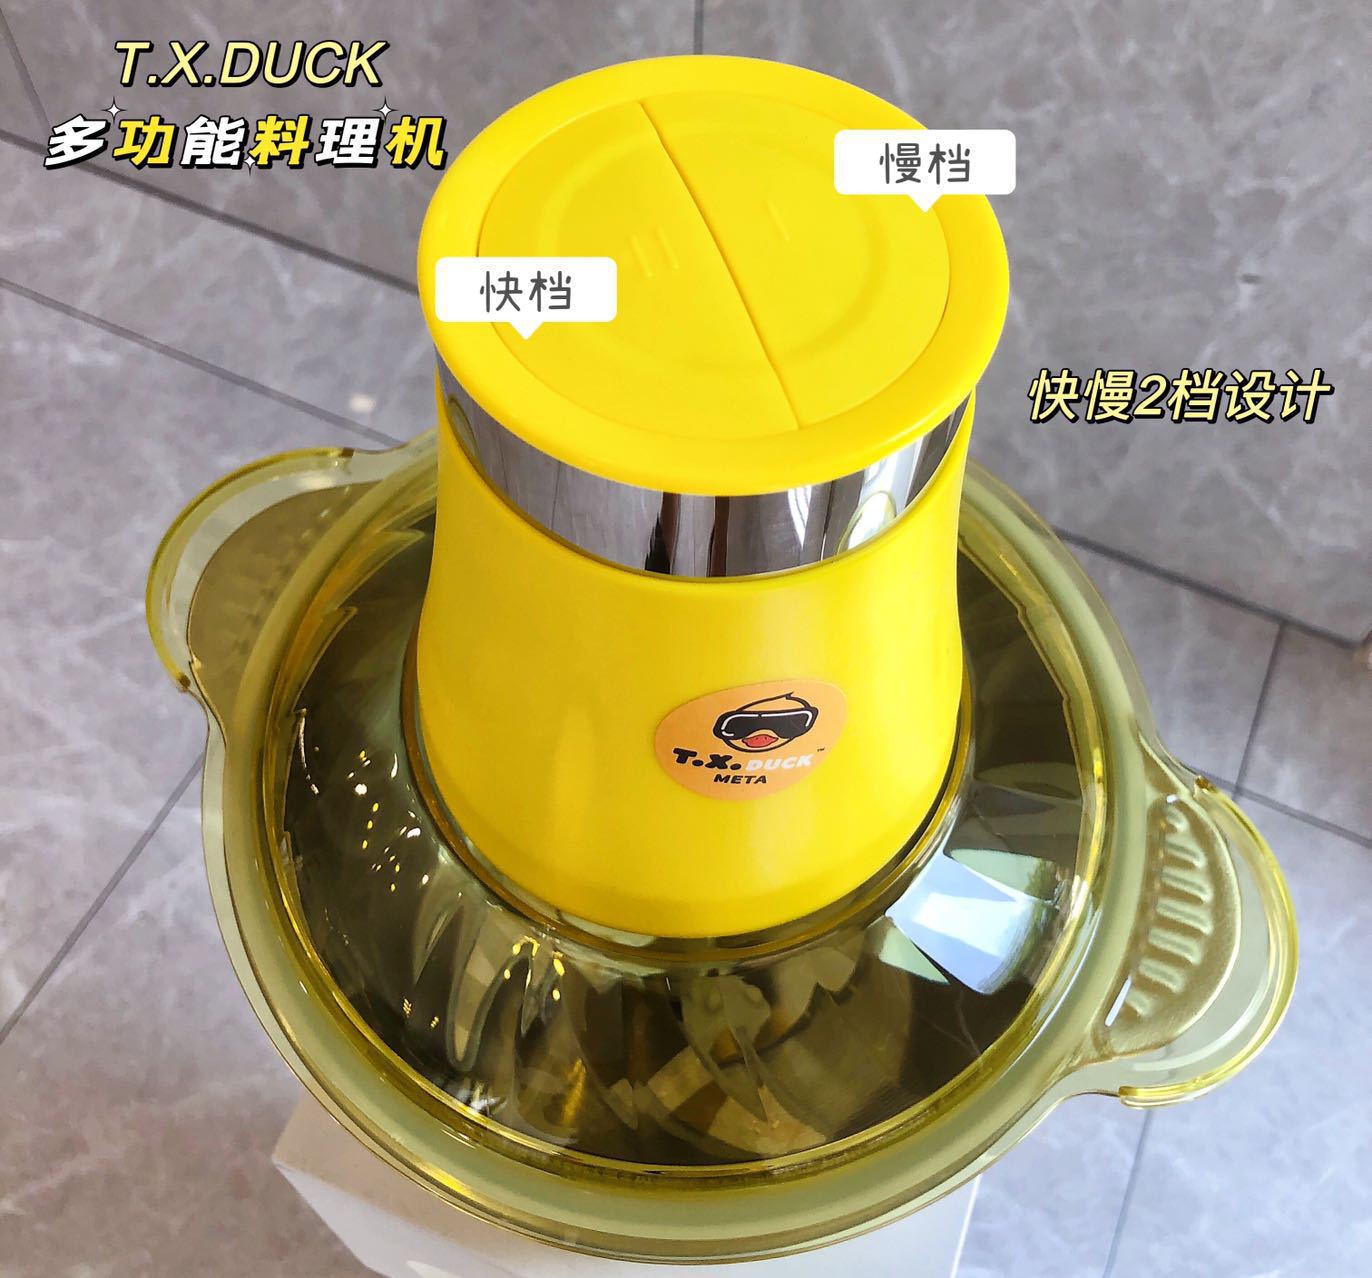 [Activity Gift] Small Yellow Duck Stainless Steel Meat Grinder New Multi-Functional Electric Cooking Machine Anniversary Store Celebration